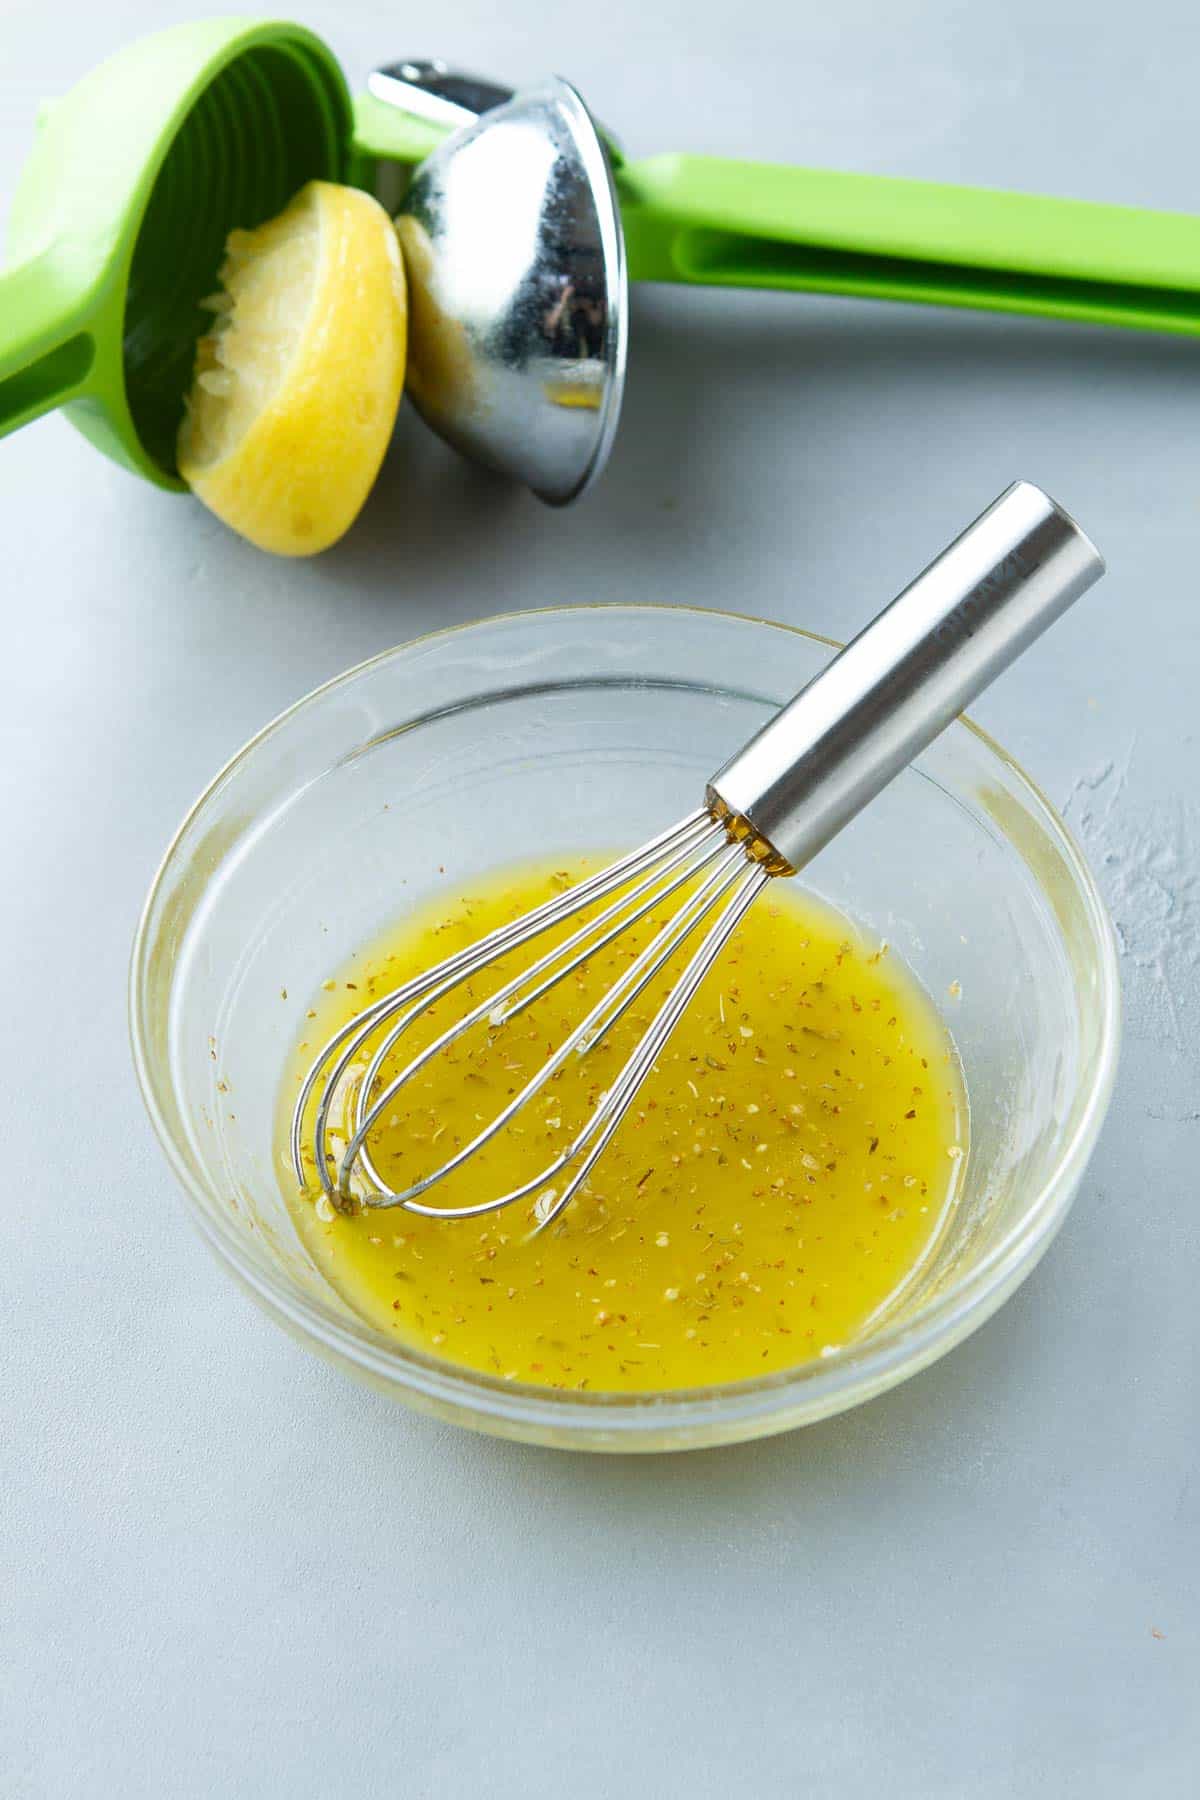 Lemon juice, herbs and whisk in a bowl. Citrus juicer with a half lemon.